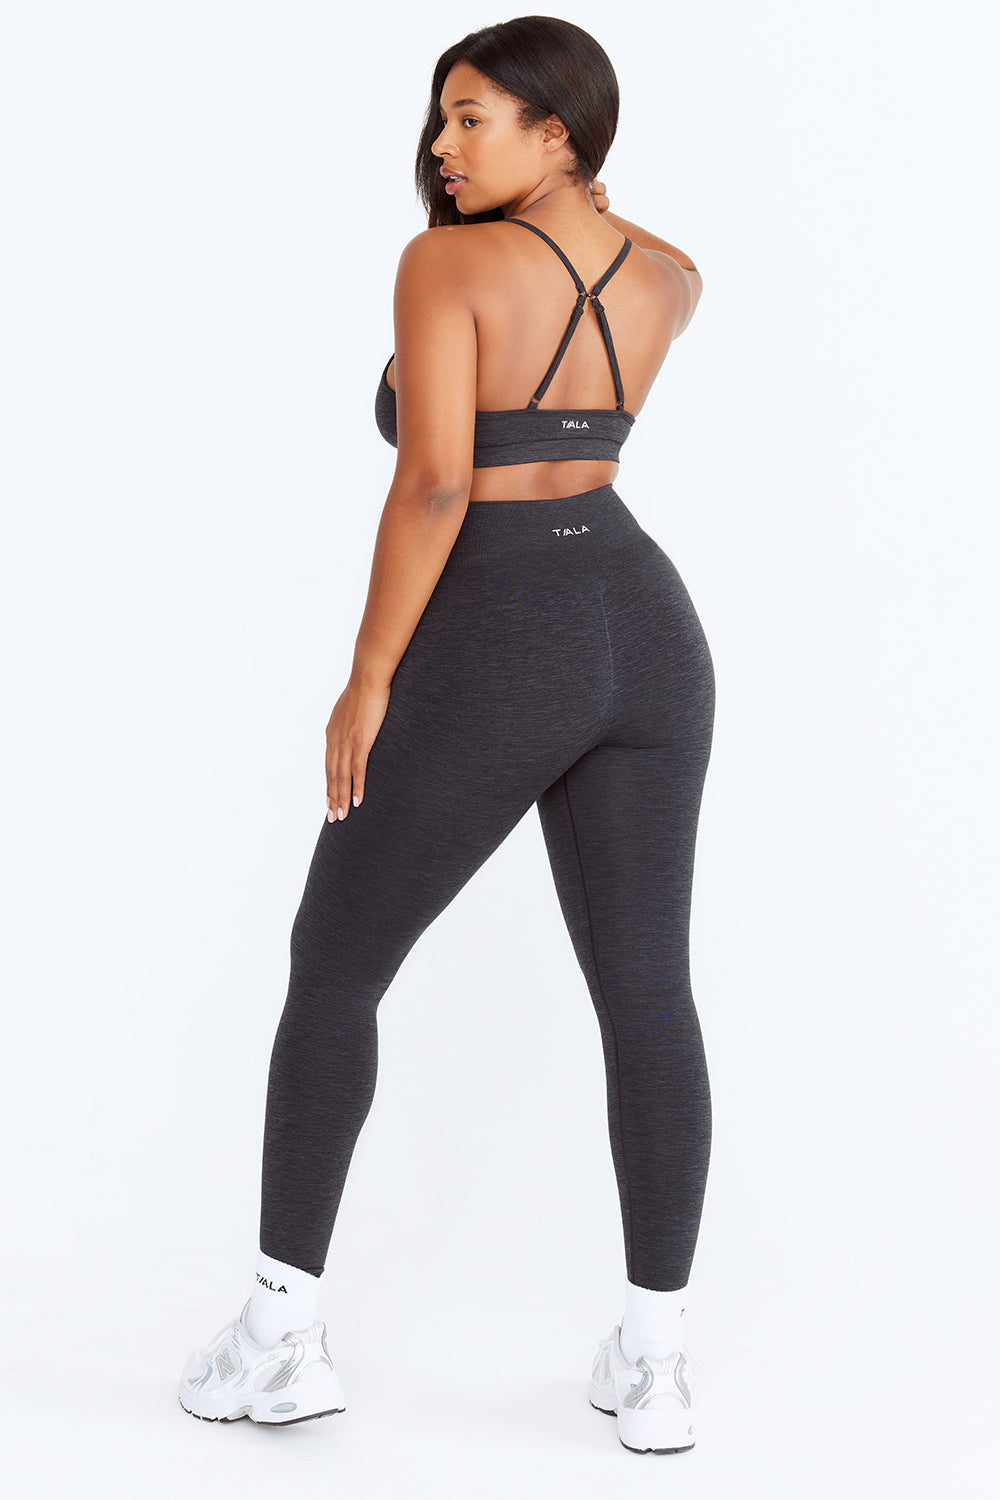 Everyone's going crazy over these new Yoga Fitness Legging…